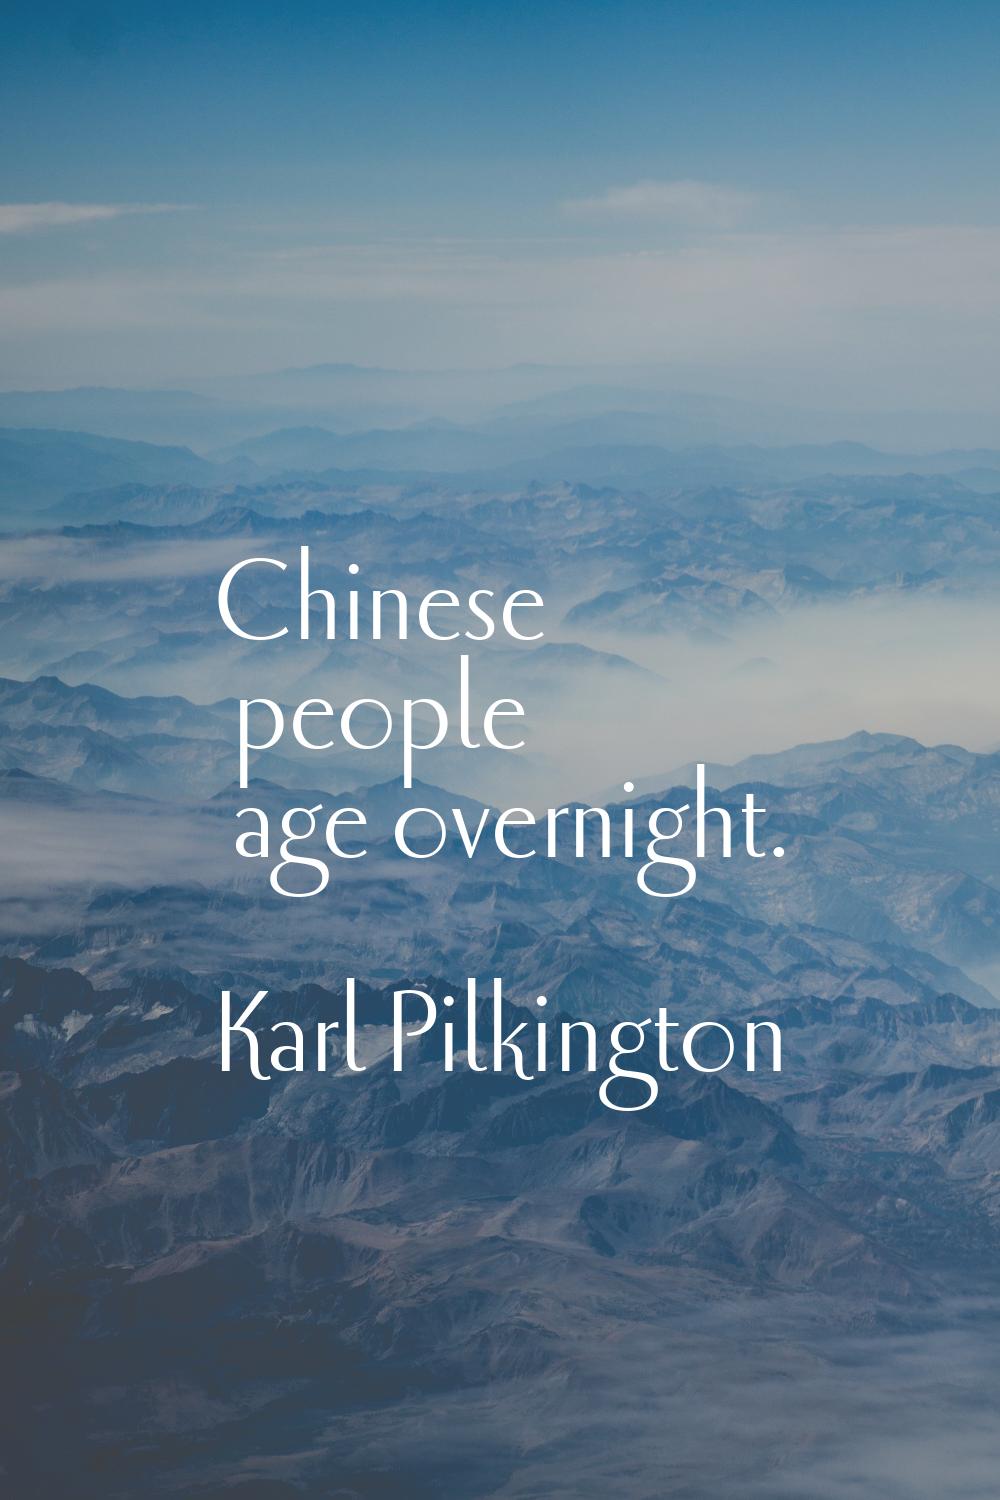 Chinese people age overnight.